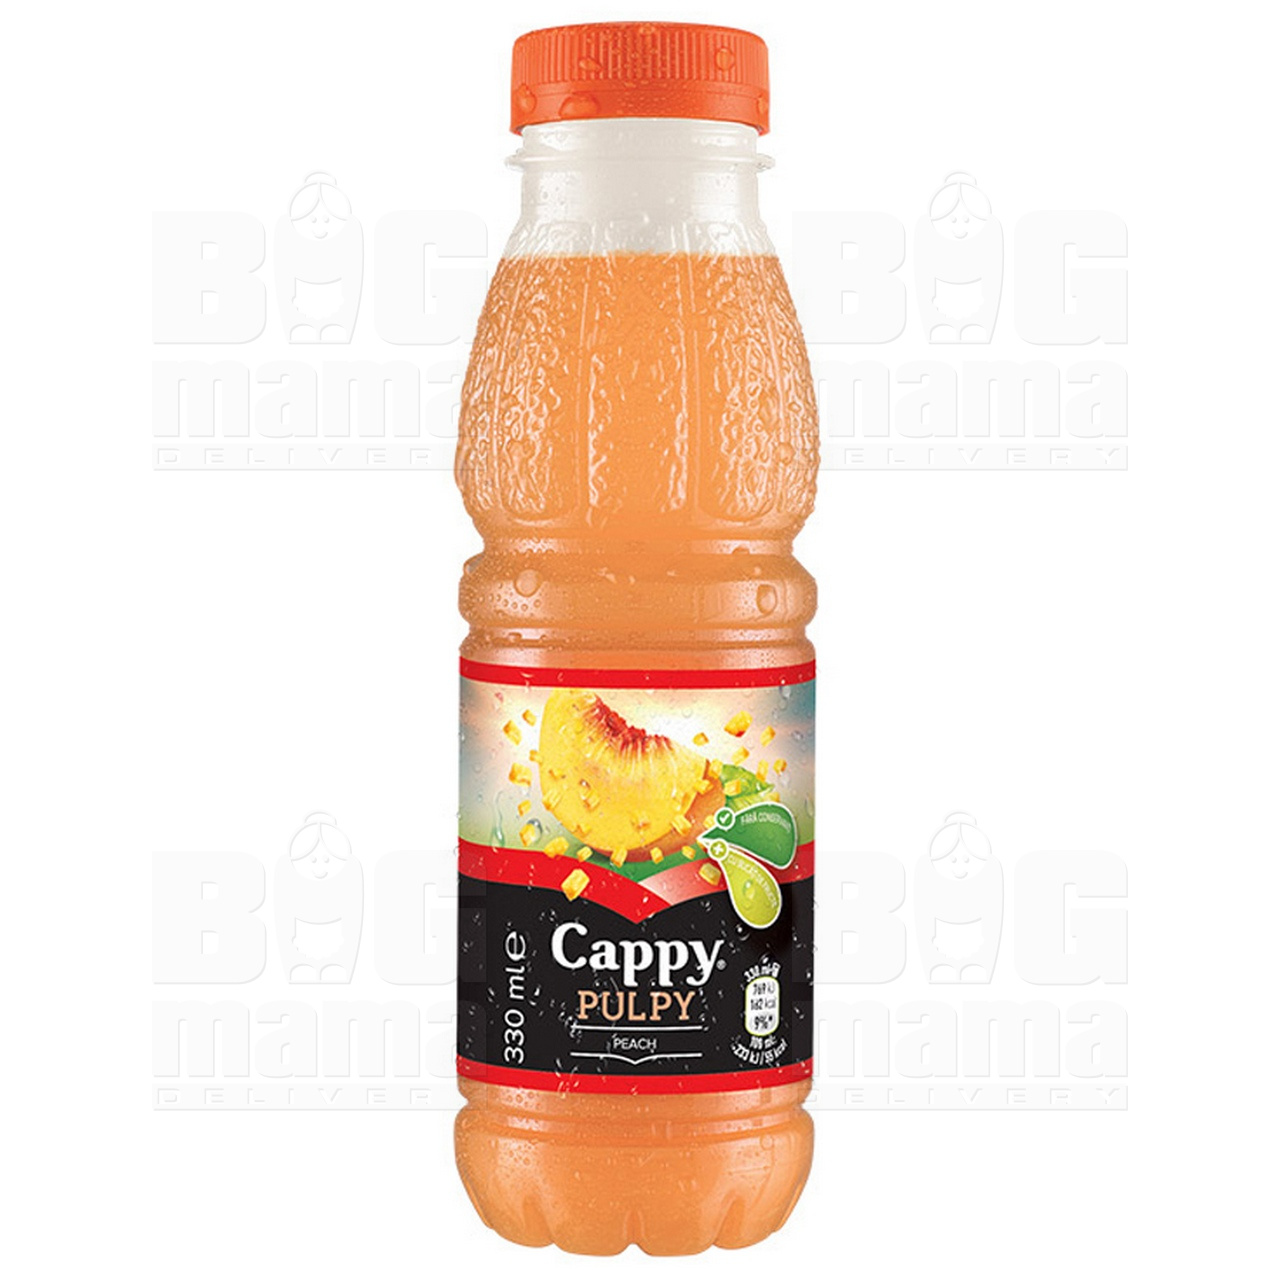 Product #232 image - Cappy Pulpy Peach 0,33l